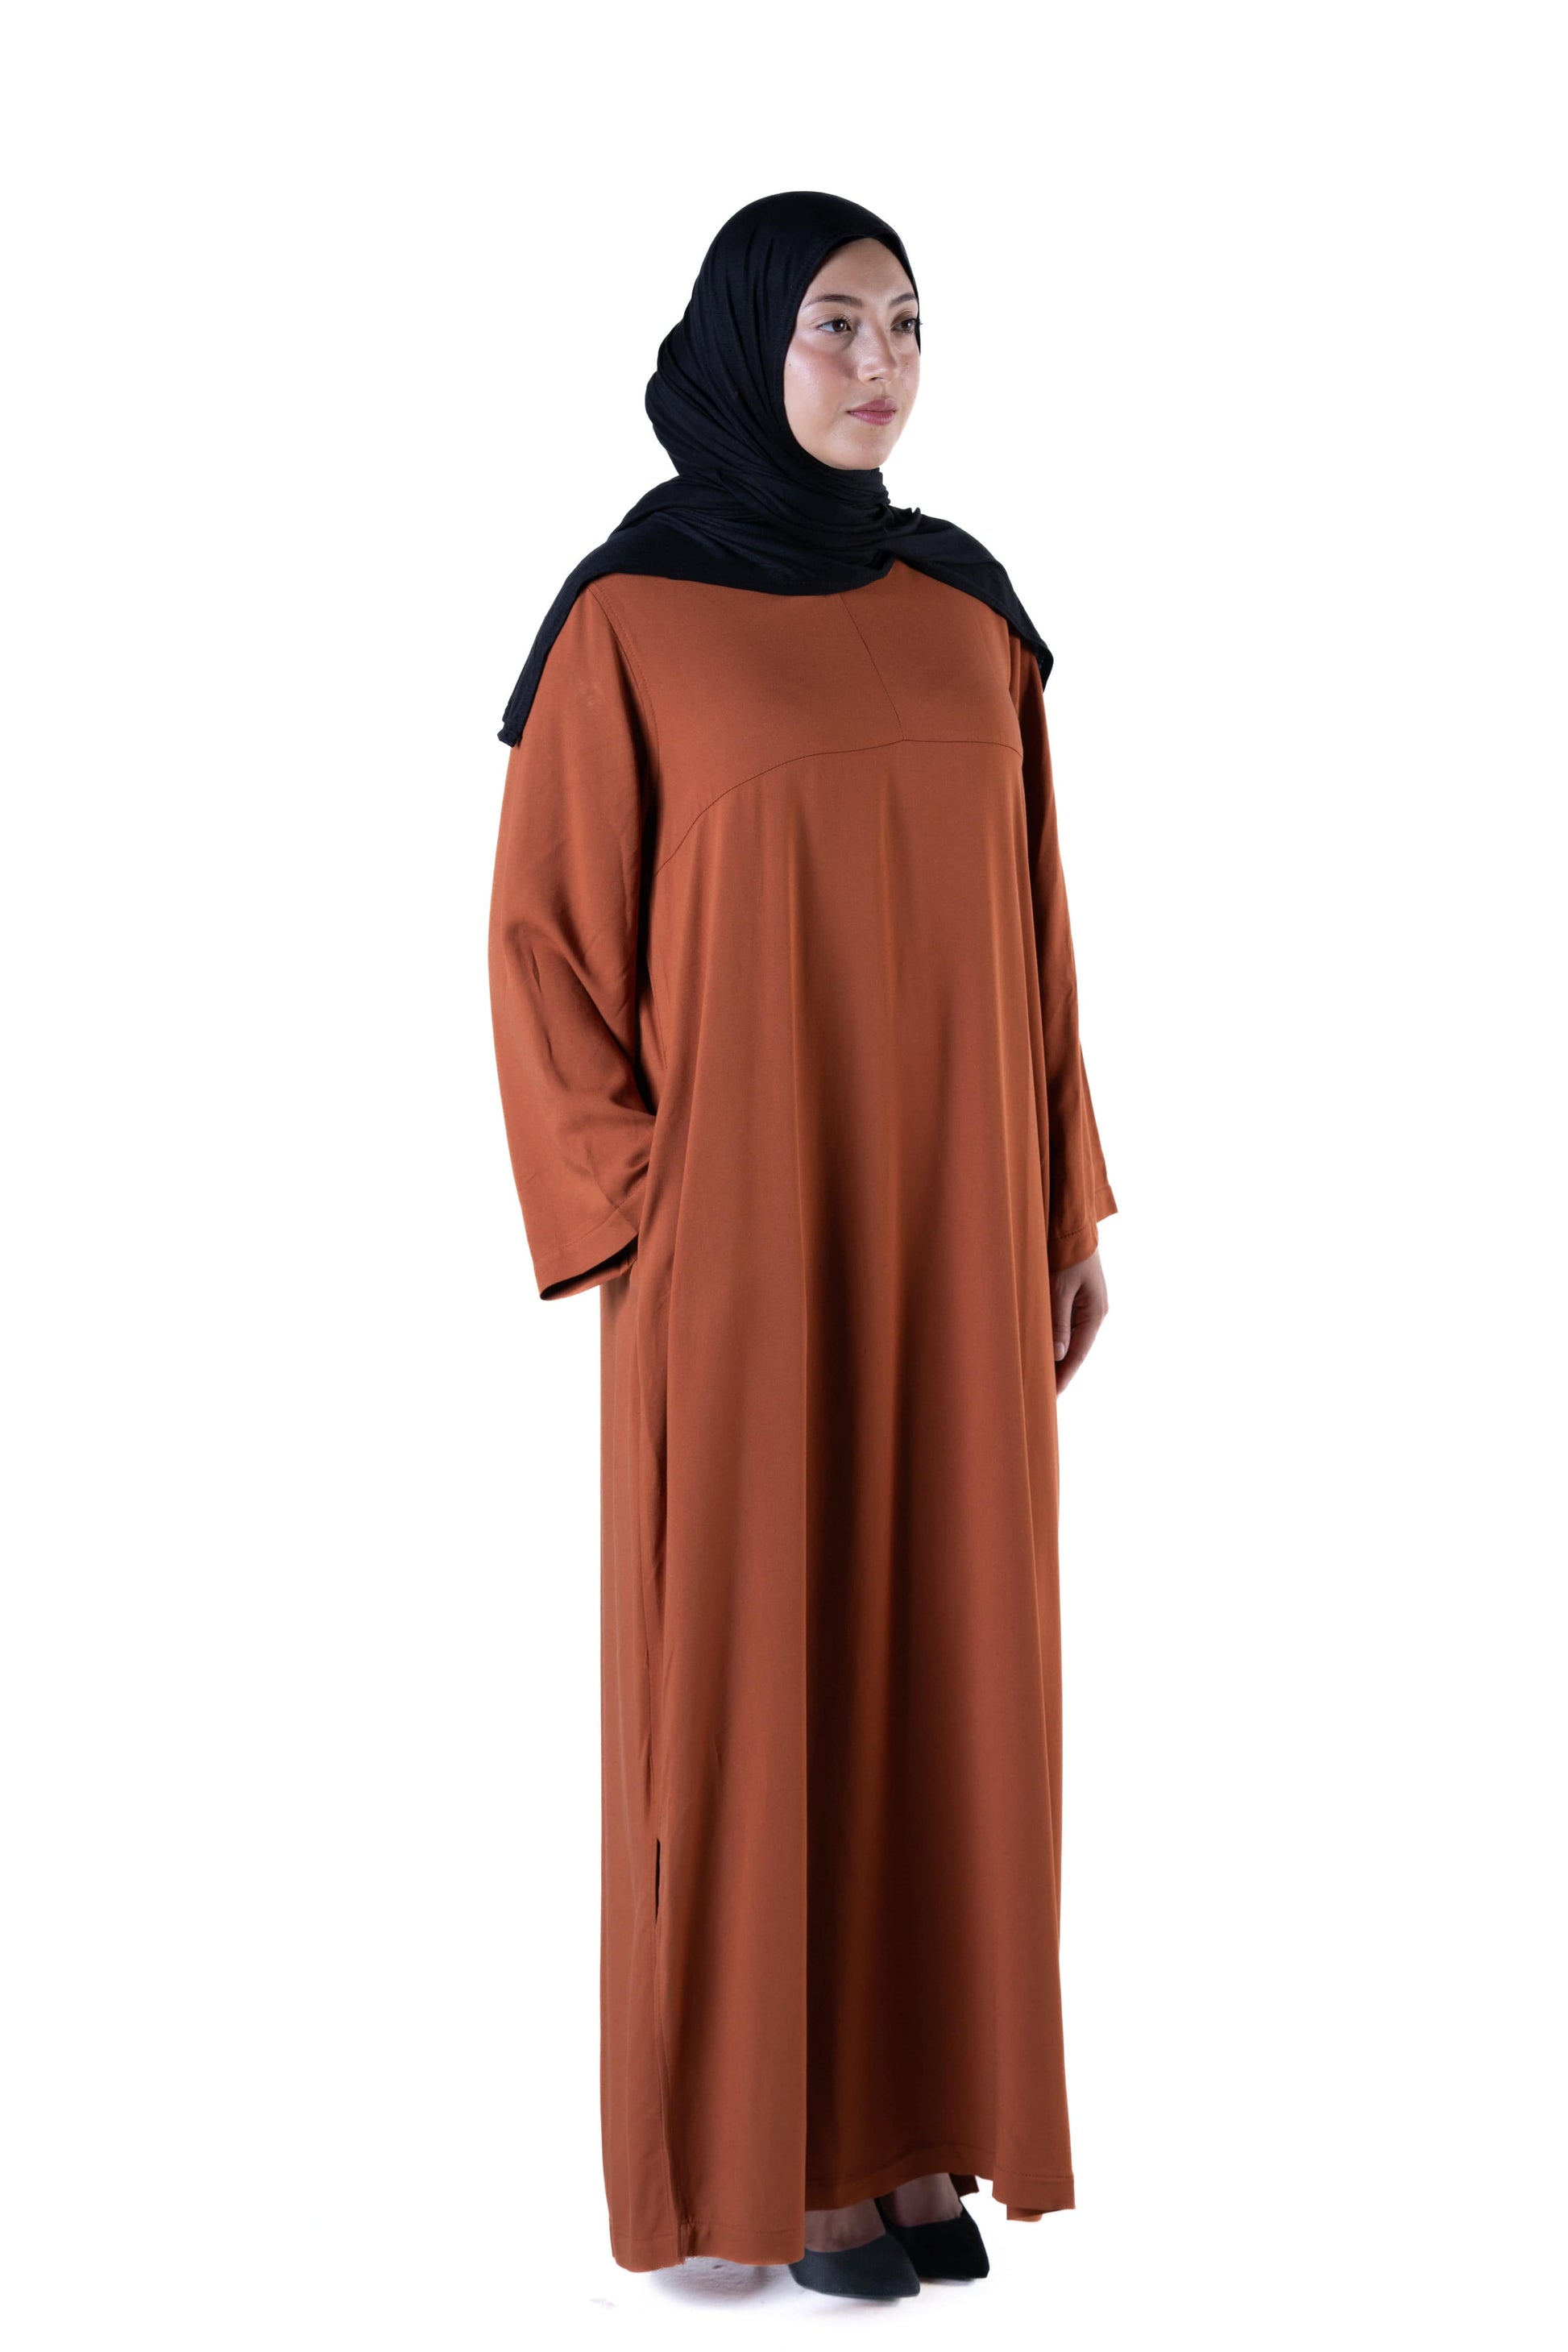 jolienisa Abaya S Embrace timeless elegance and effortless comfort with the Jolie Nisa Essential Abaya in a stunning Brick color. Montreal-Made Abaya: The Classic Jolie Nisa Essential Abaya in Brick